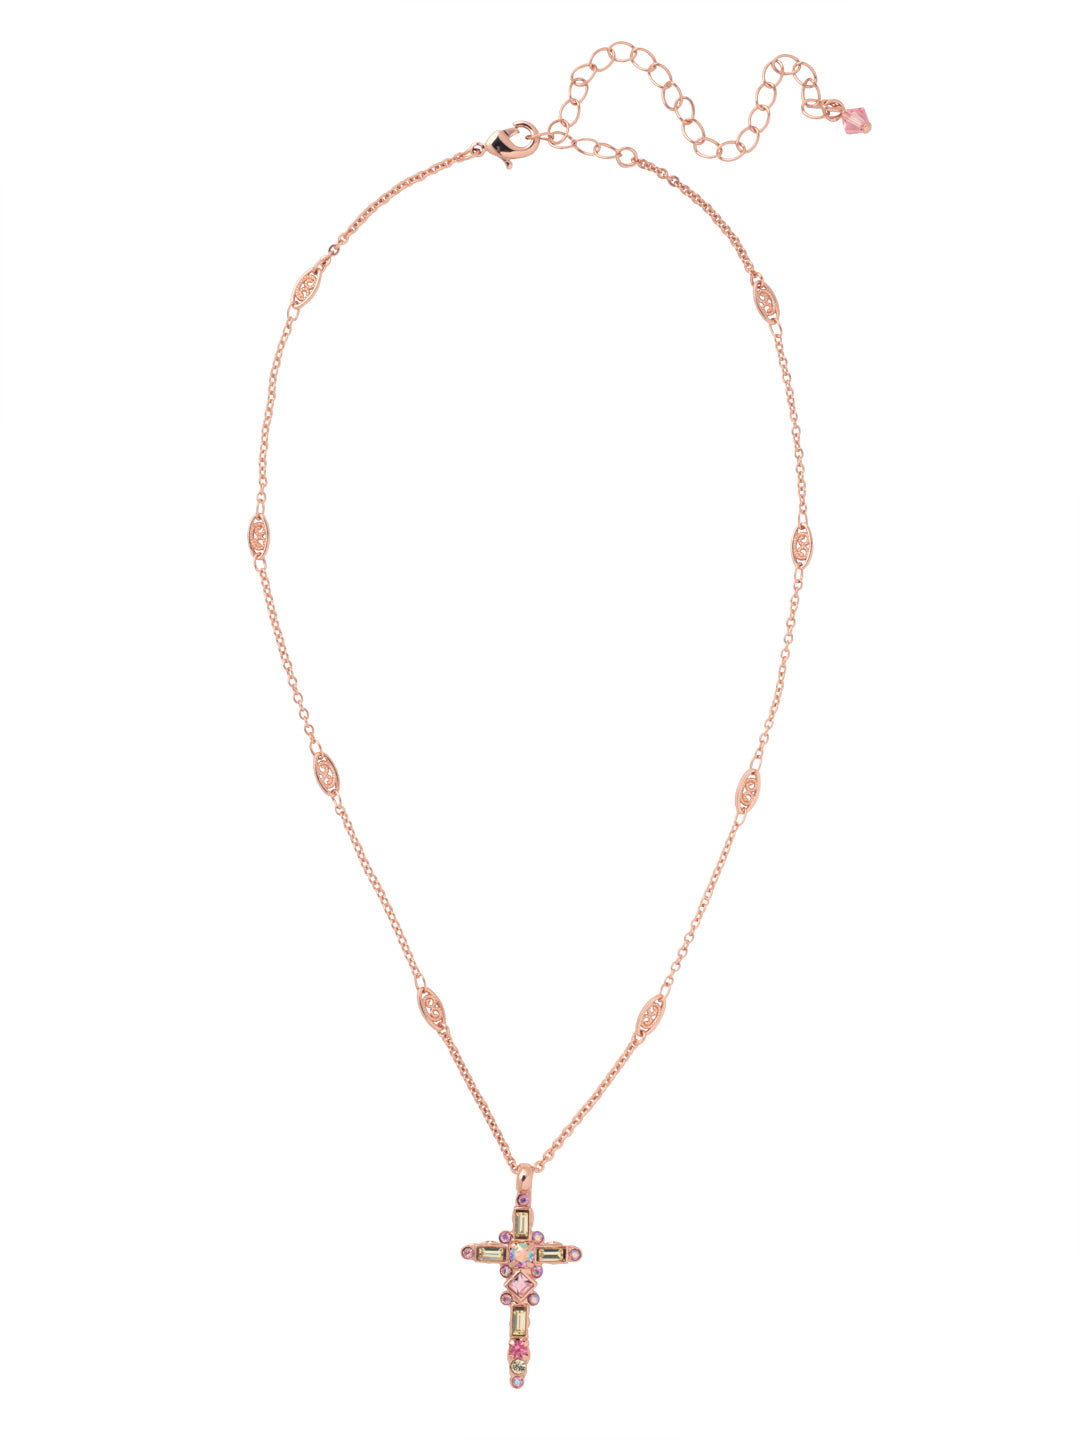 Dierdre Cross Pendant Necklace - NDQ54RGPPN - <p>A truly divine pendant. This delicate cross necklace features multi-cut crystals in an antique inspired setting. This crystal cross necklace offers movement on the chain for ease of wear. From Sorrelli's Pink Pineapple collection in our Rose Gold-tone finish.</p>